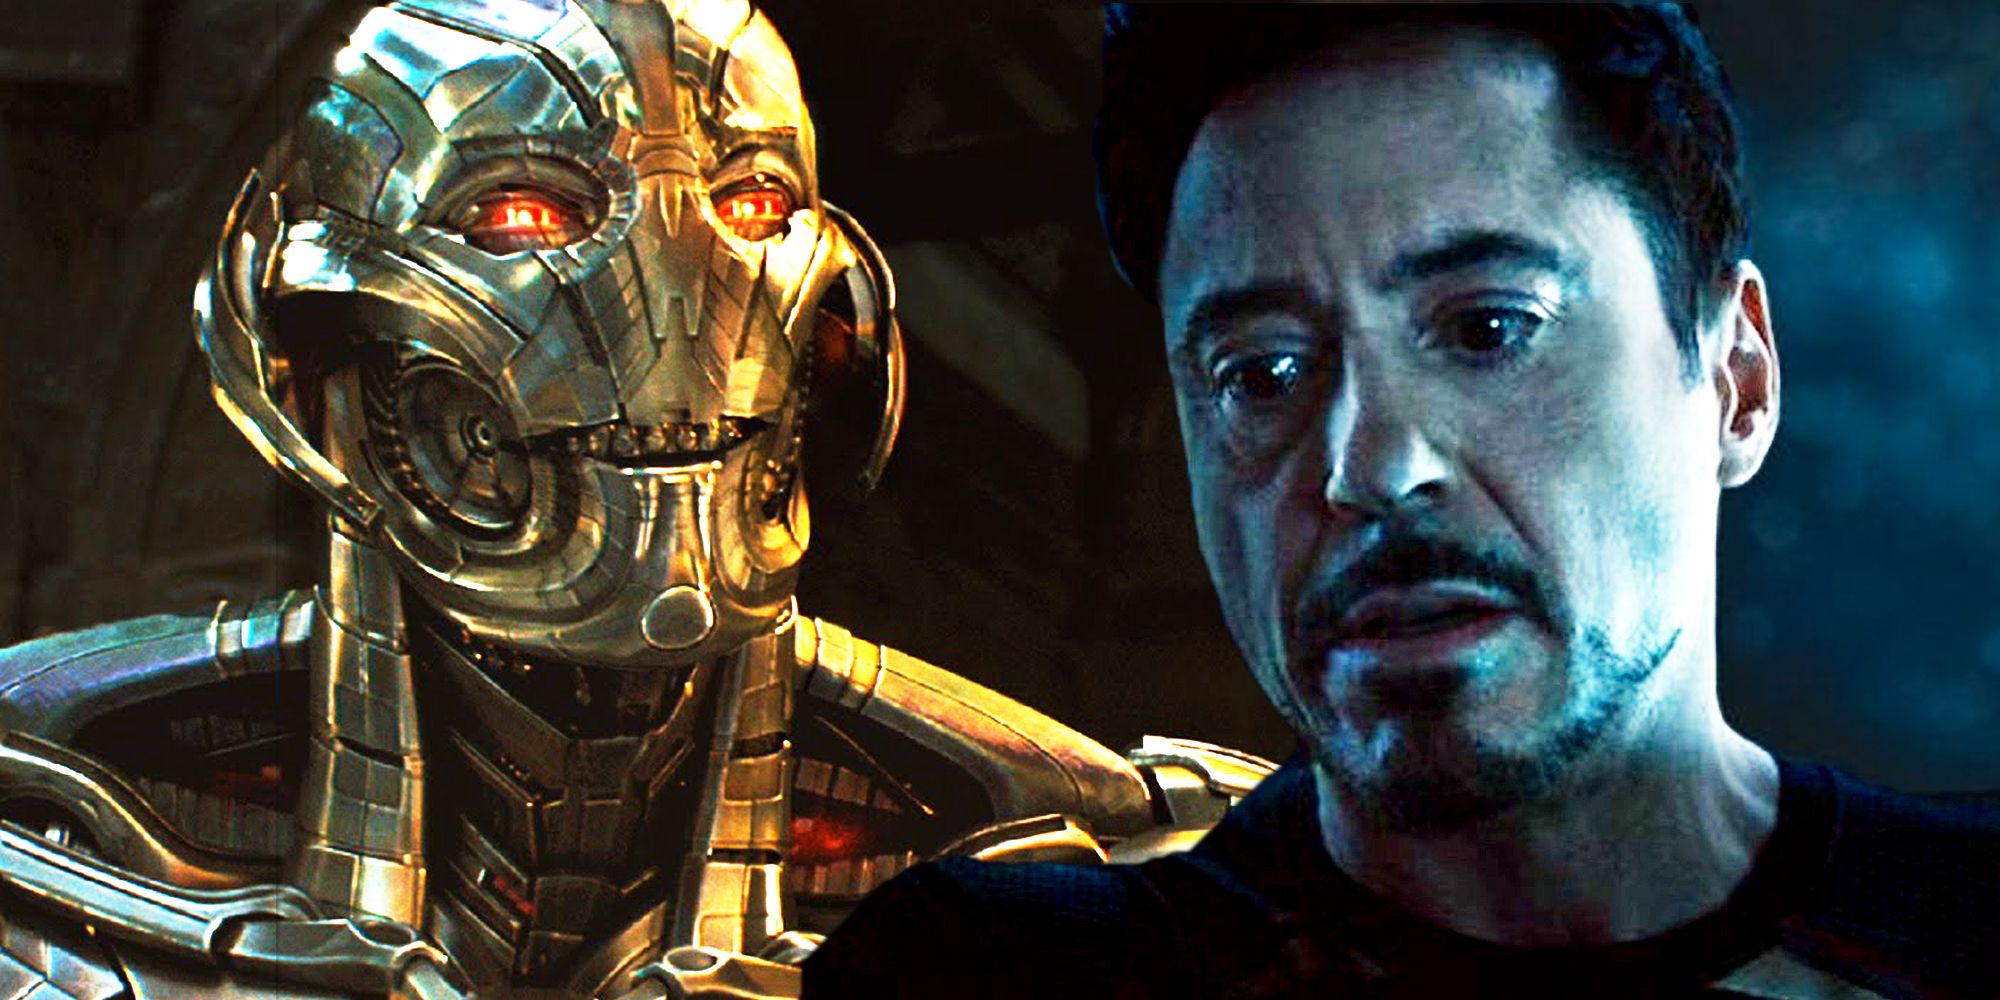 Tony Stark and Ultron in Avengers Age of Ultron